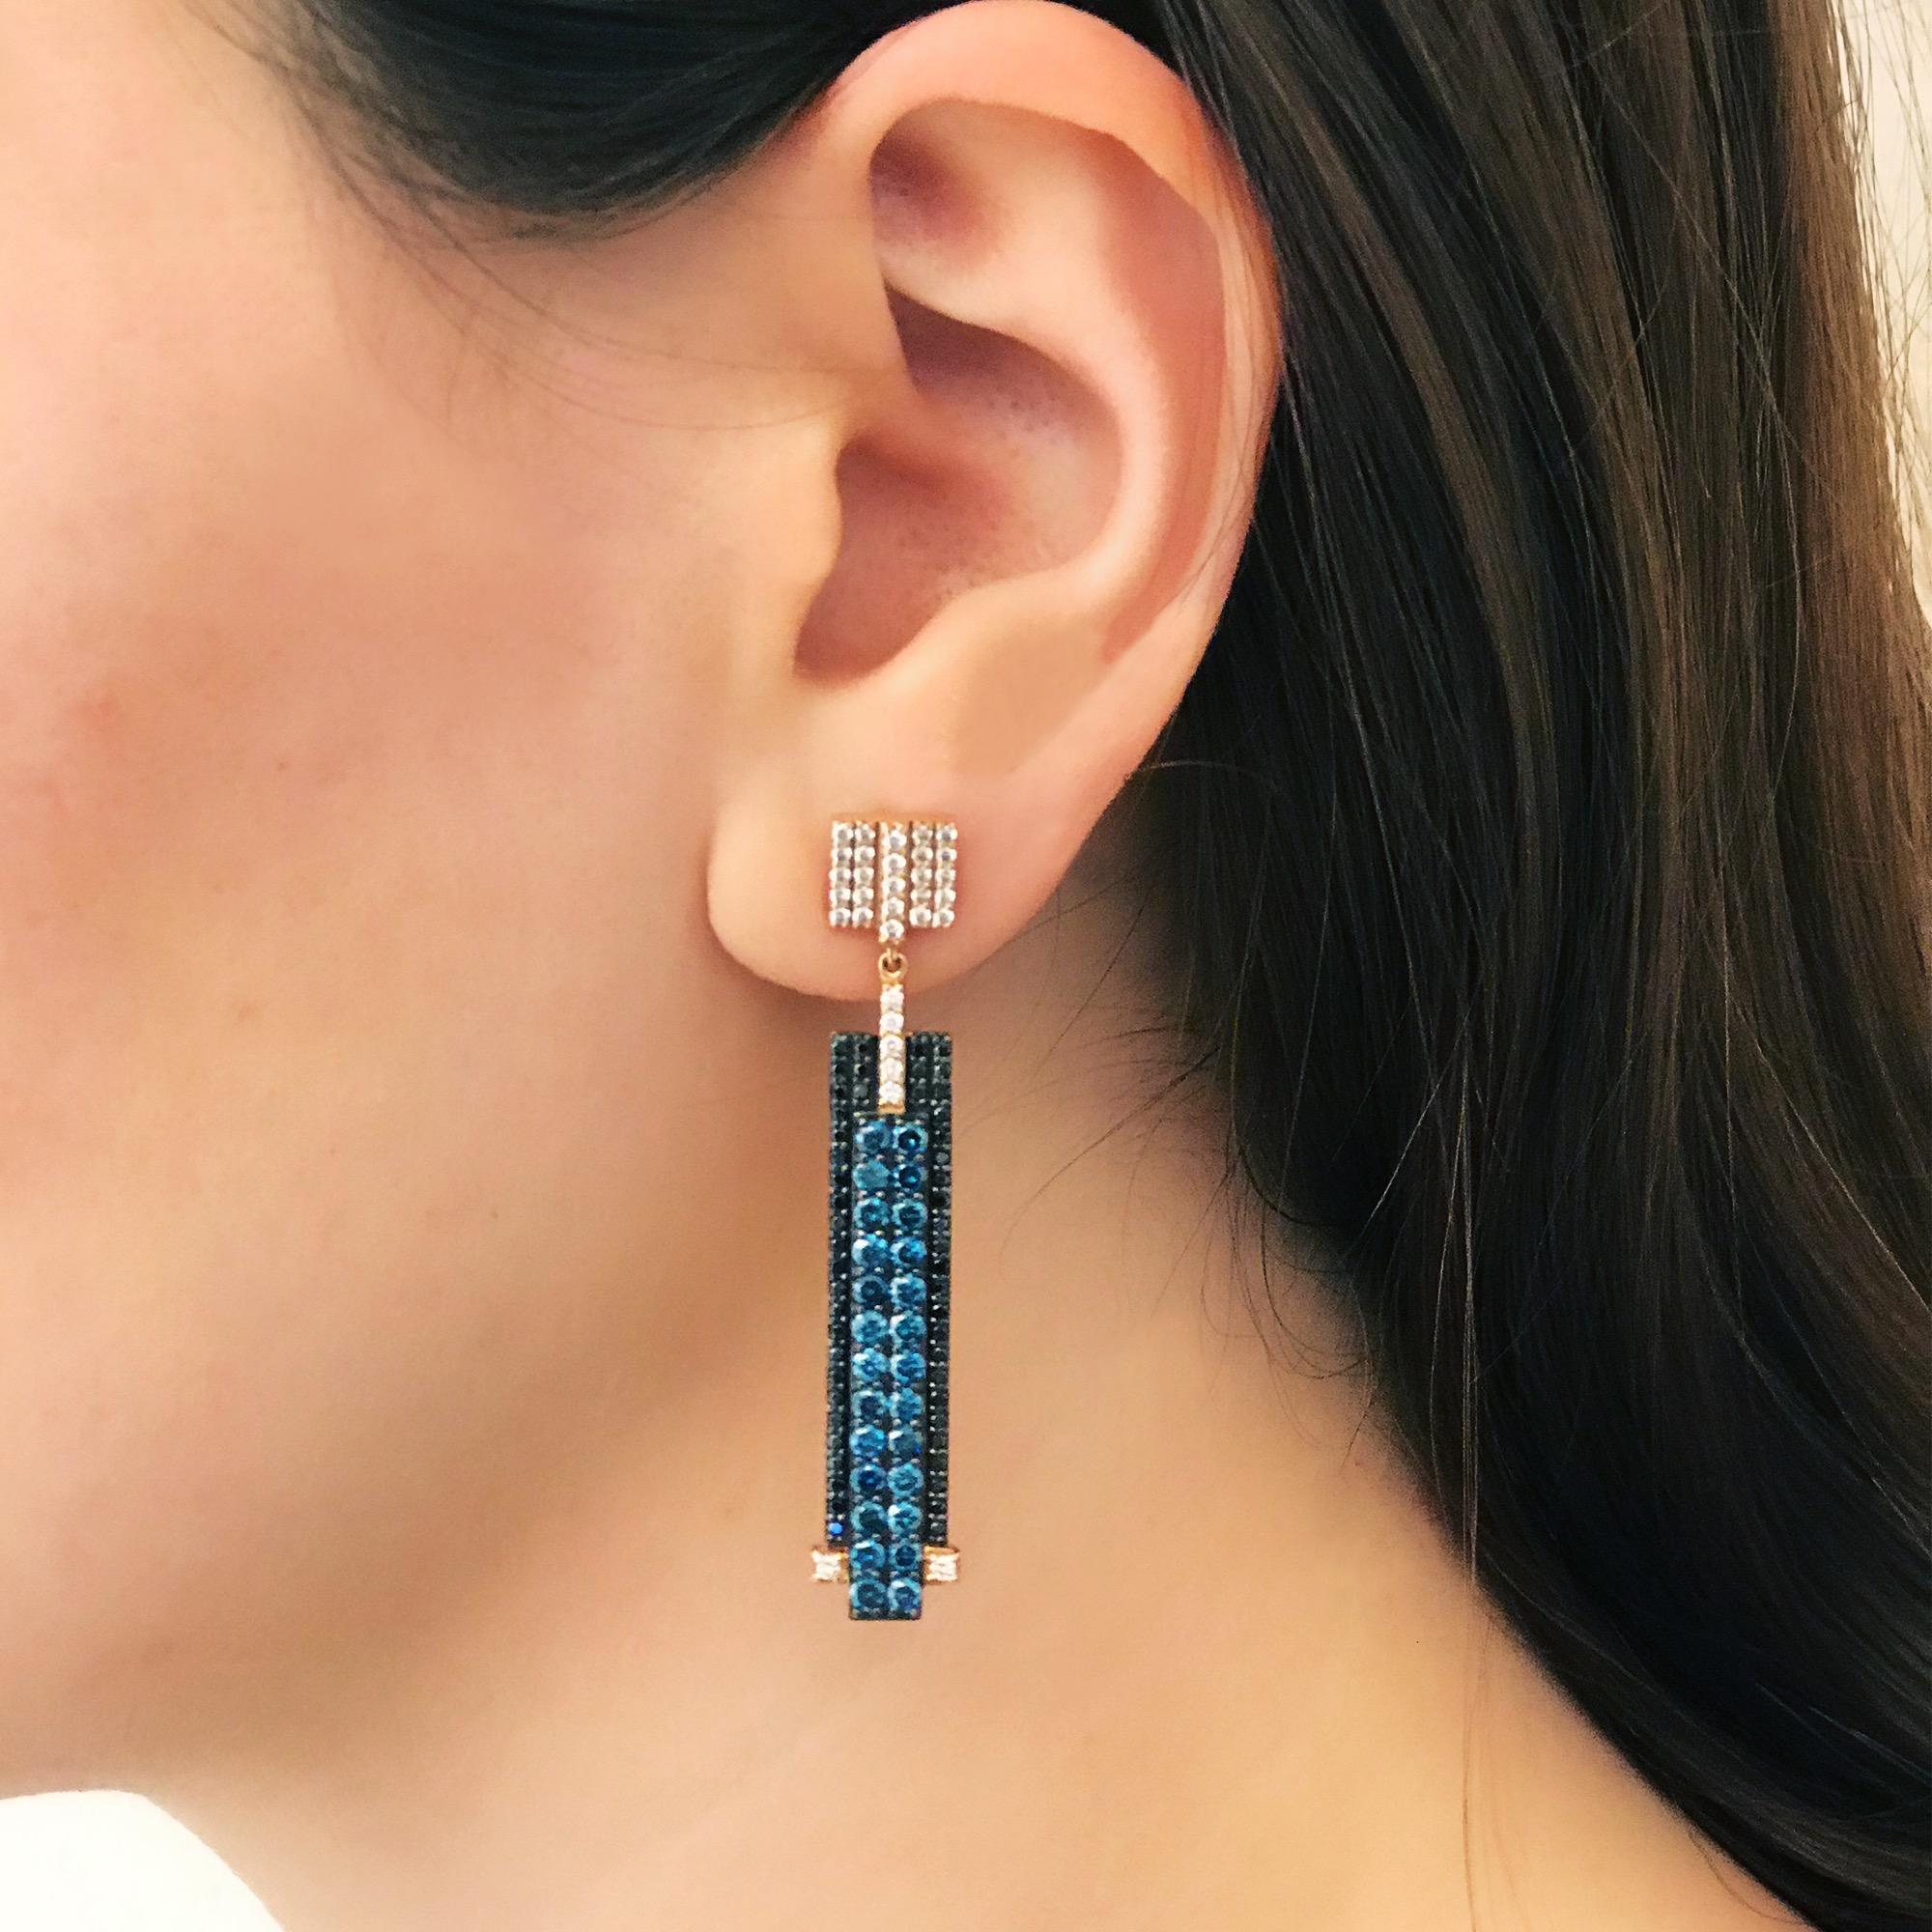 Responding to the inner workings of the soul, Mondrian Earrings are the perfect pair to accompany you on a creative and awakening journey. Set in 0.49 carat white, 3.28 carat black &blue diamonds, Mondrian carries a unique elegance and charm, while